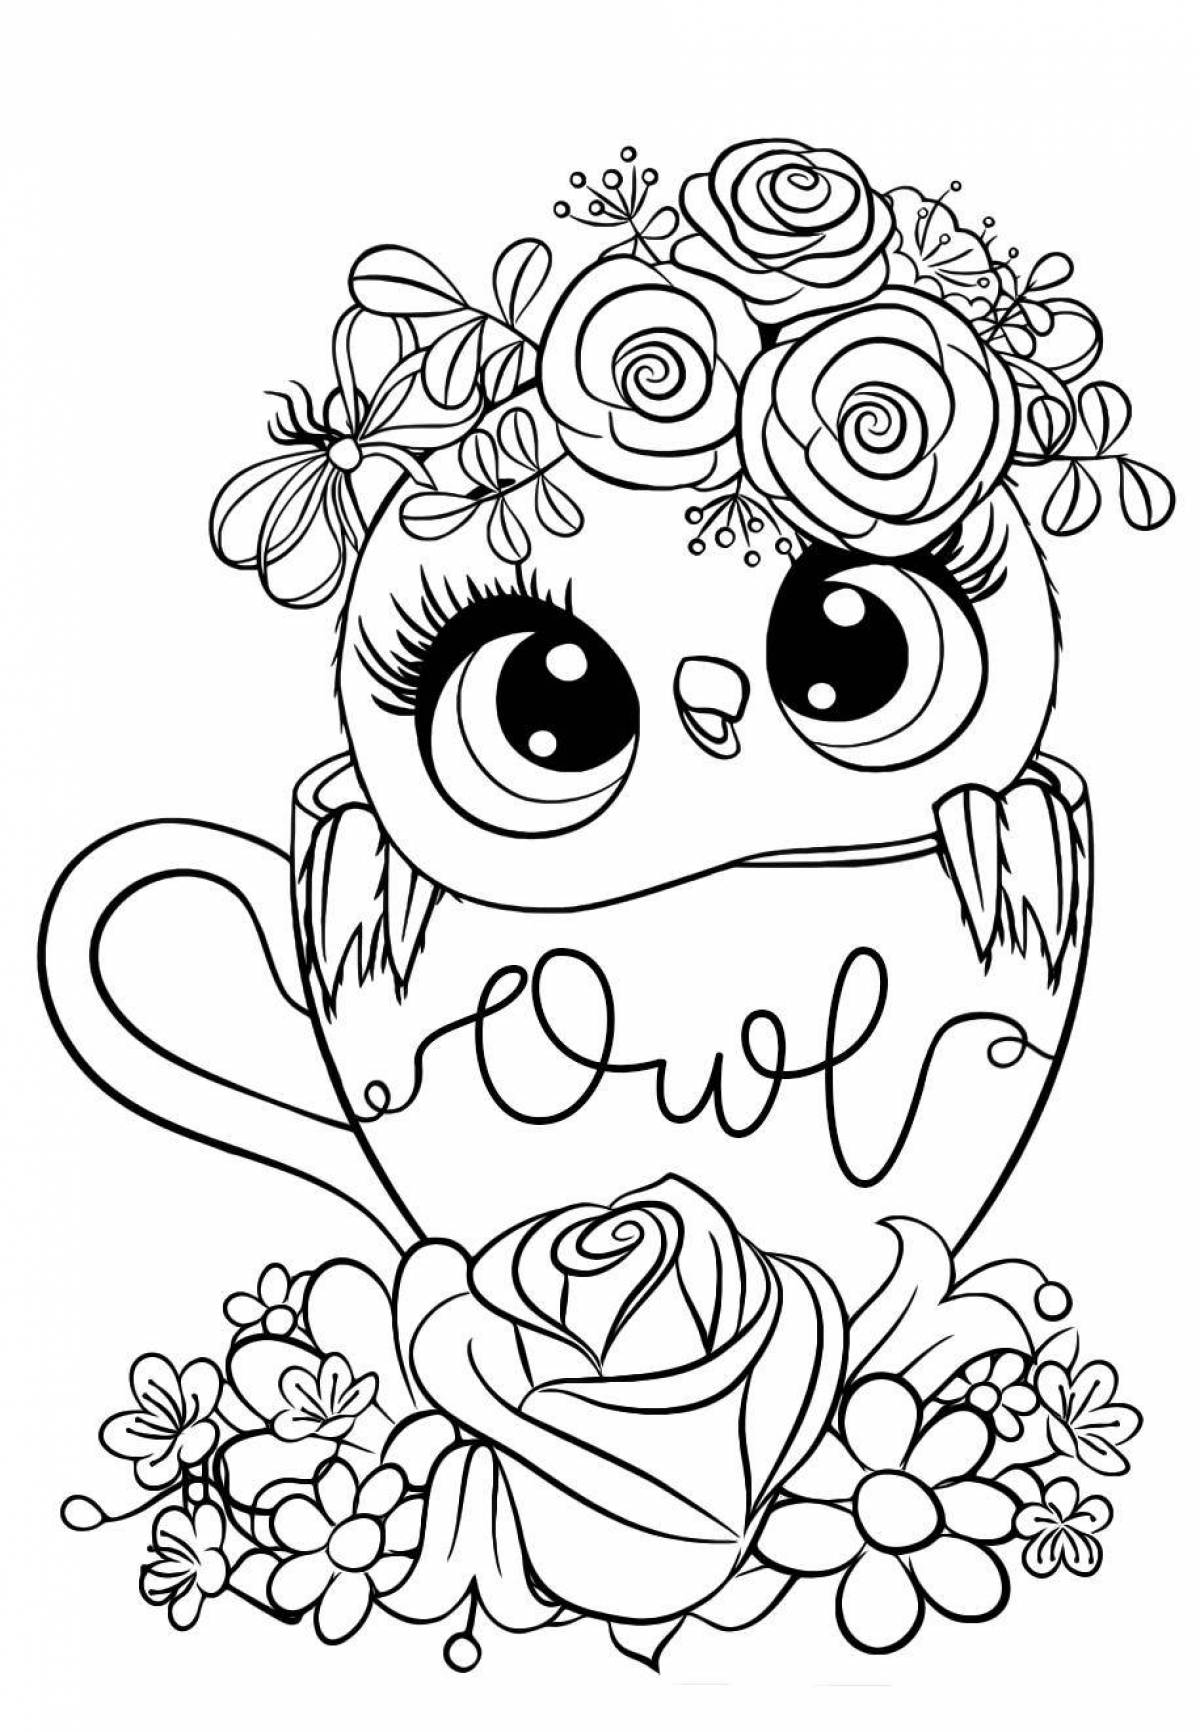 Unusual owl coloring for girls